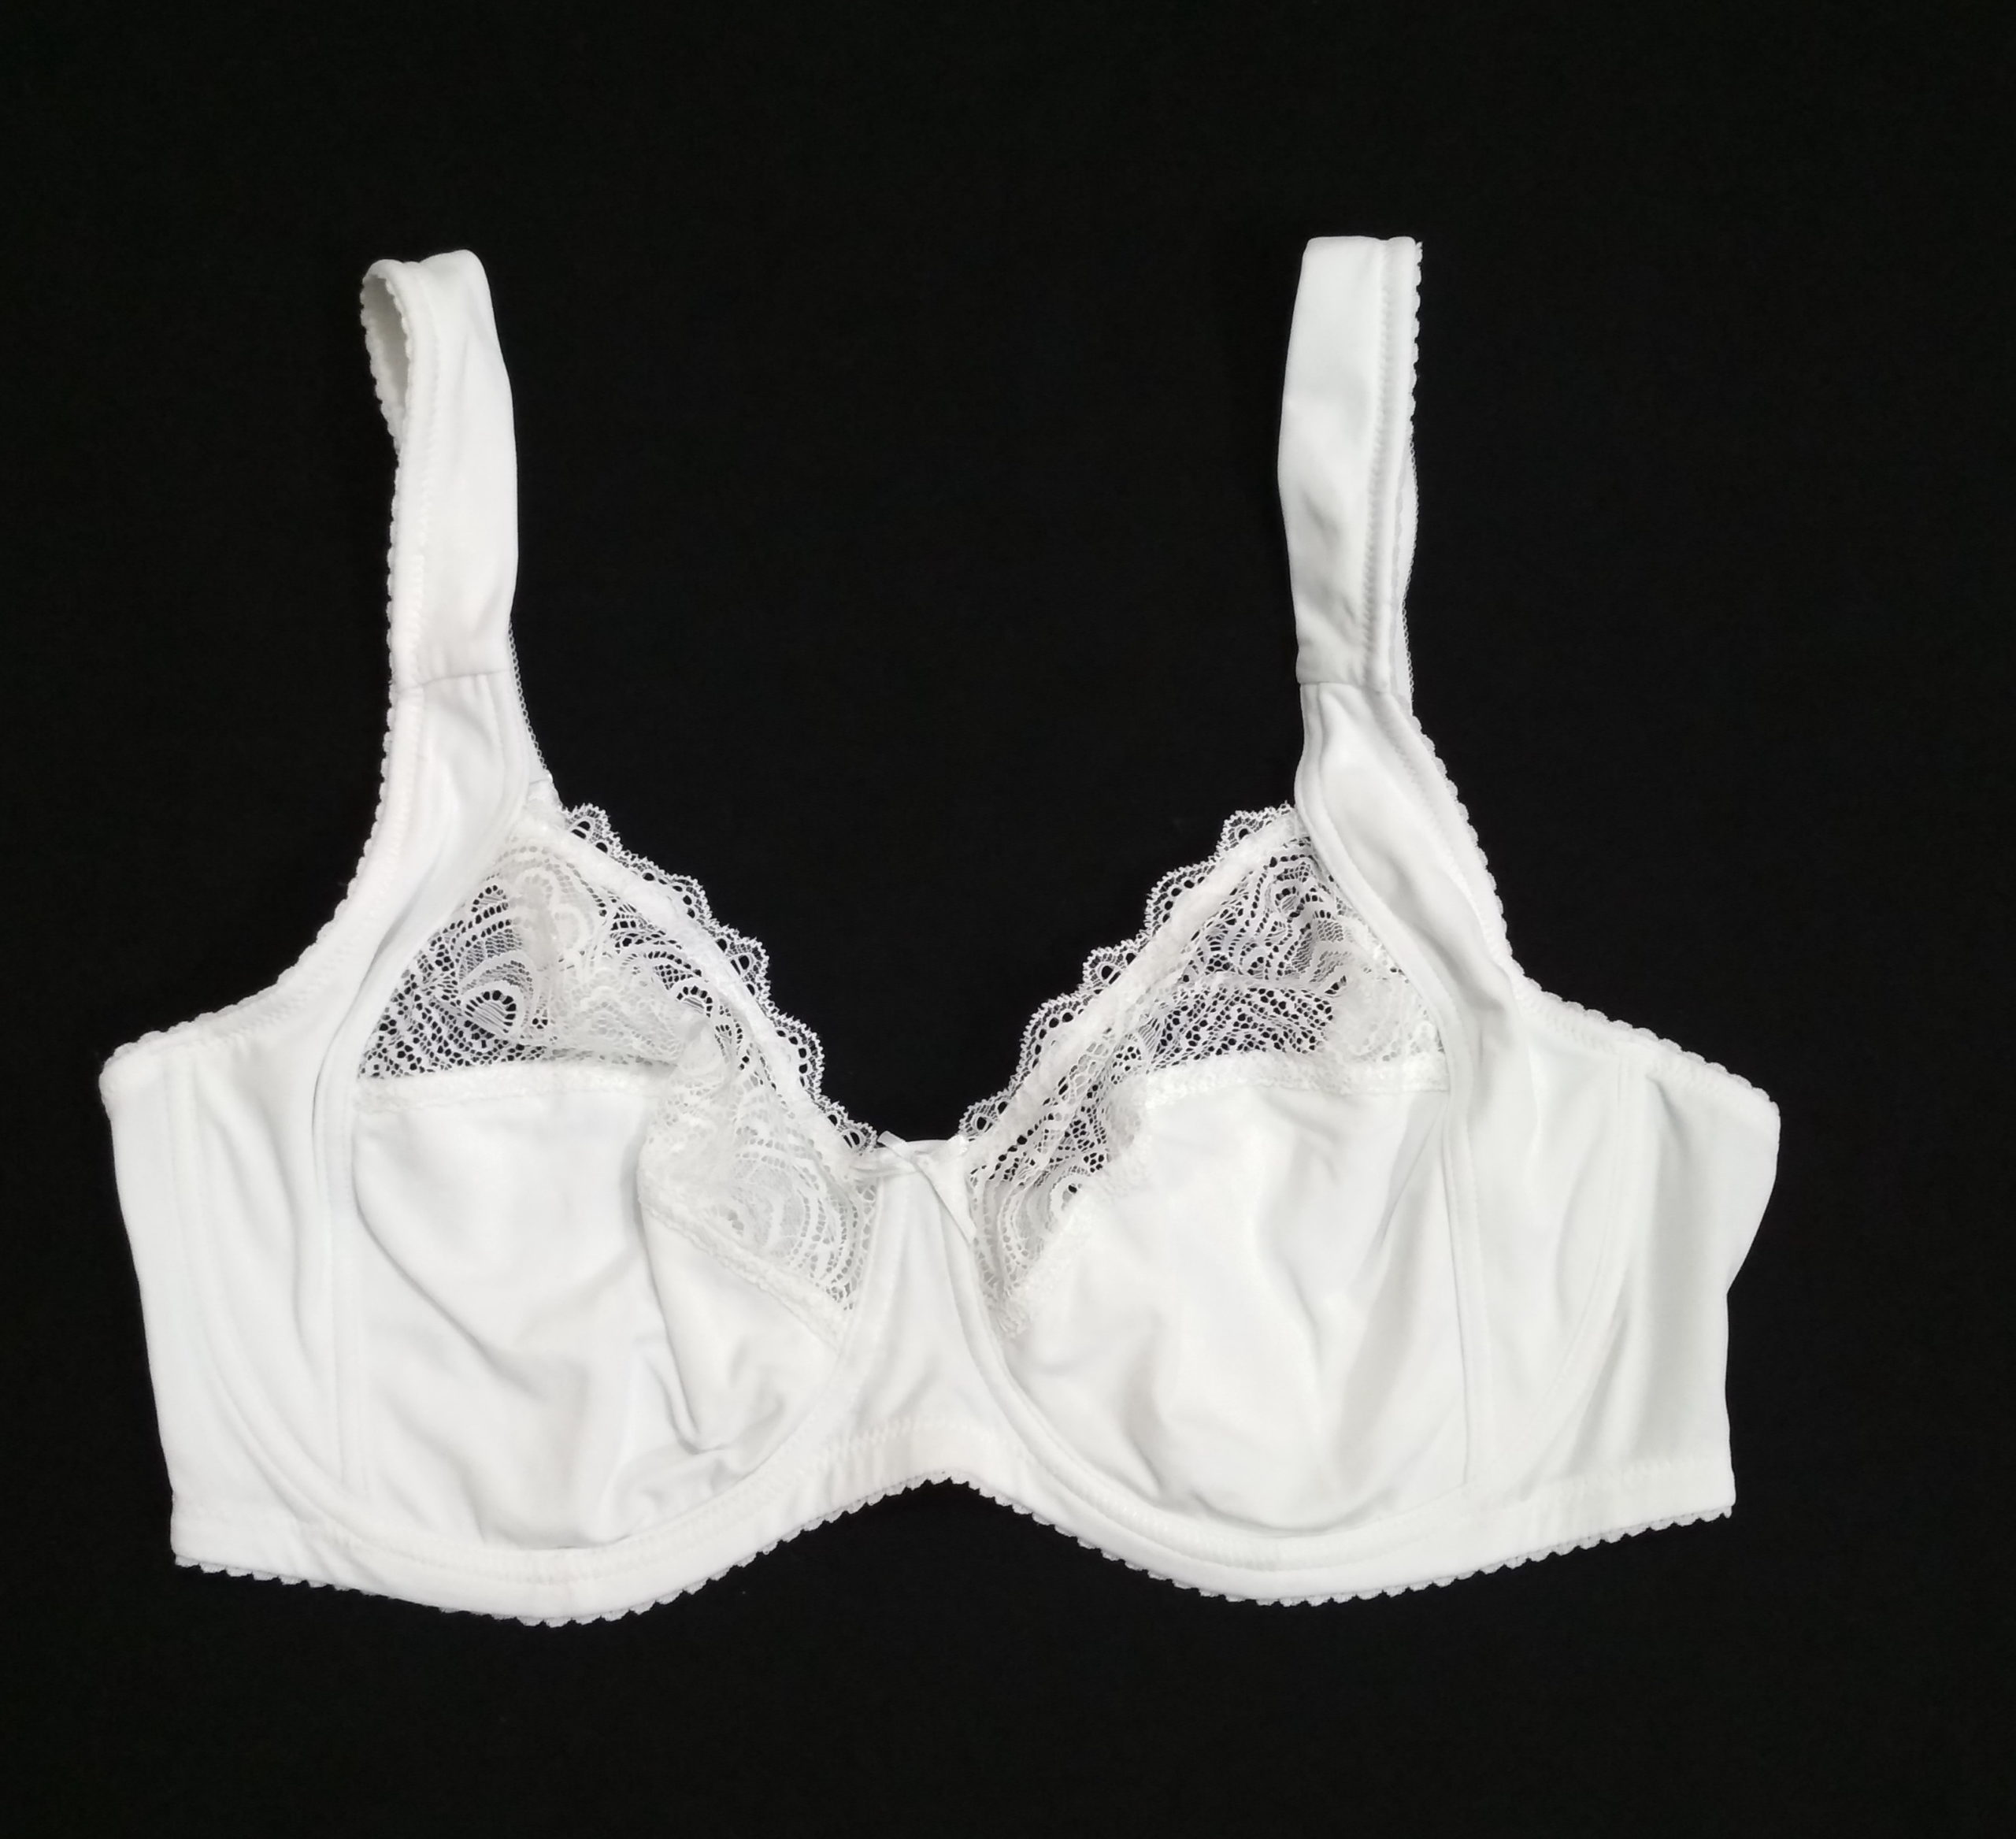 Non Padded-Non Foam Lace Design Bra - : The Ultimate Destination  for Women's Undergarments & Leading Women's Clothing Brand in Bangladesh  Online Shopping With Home Delivery